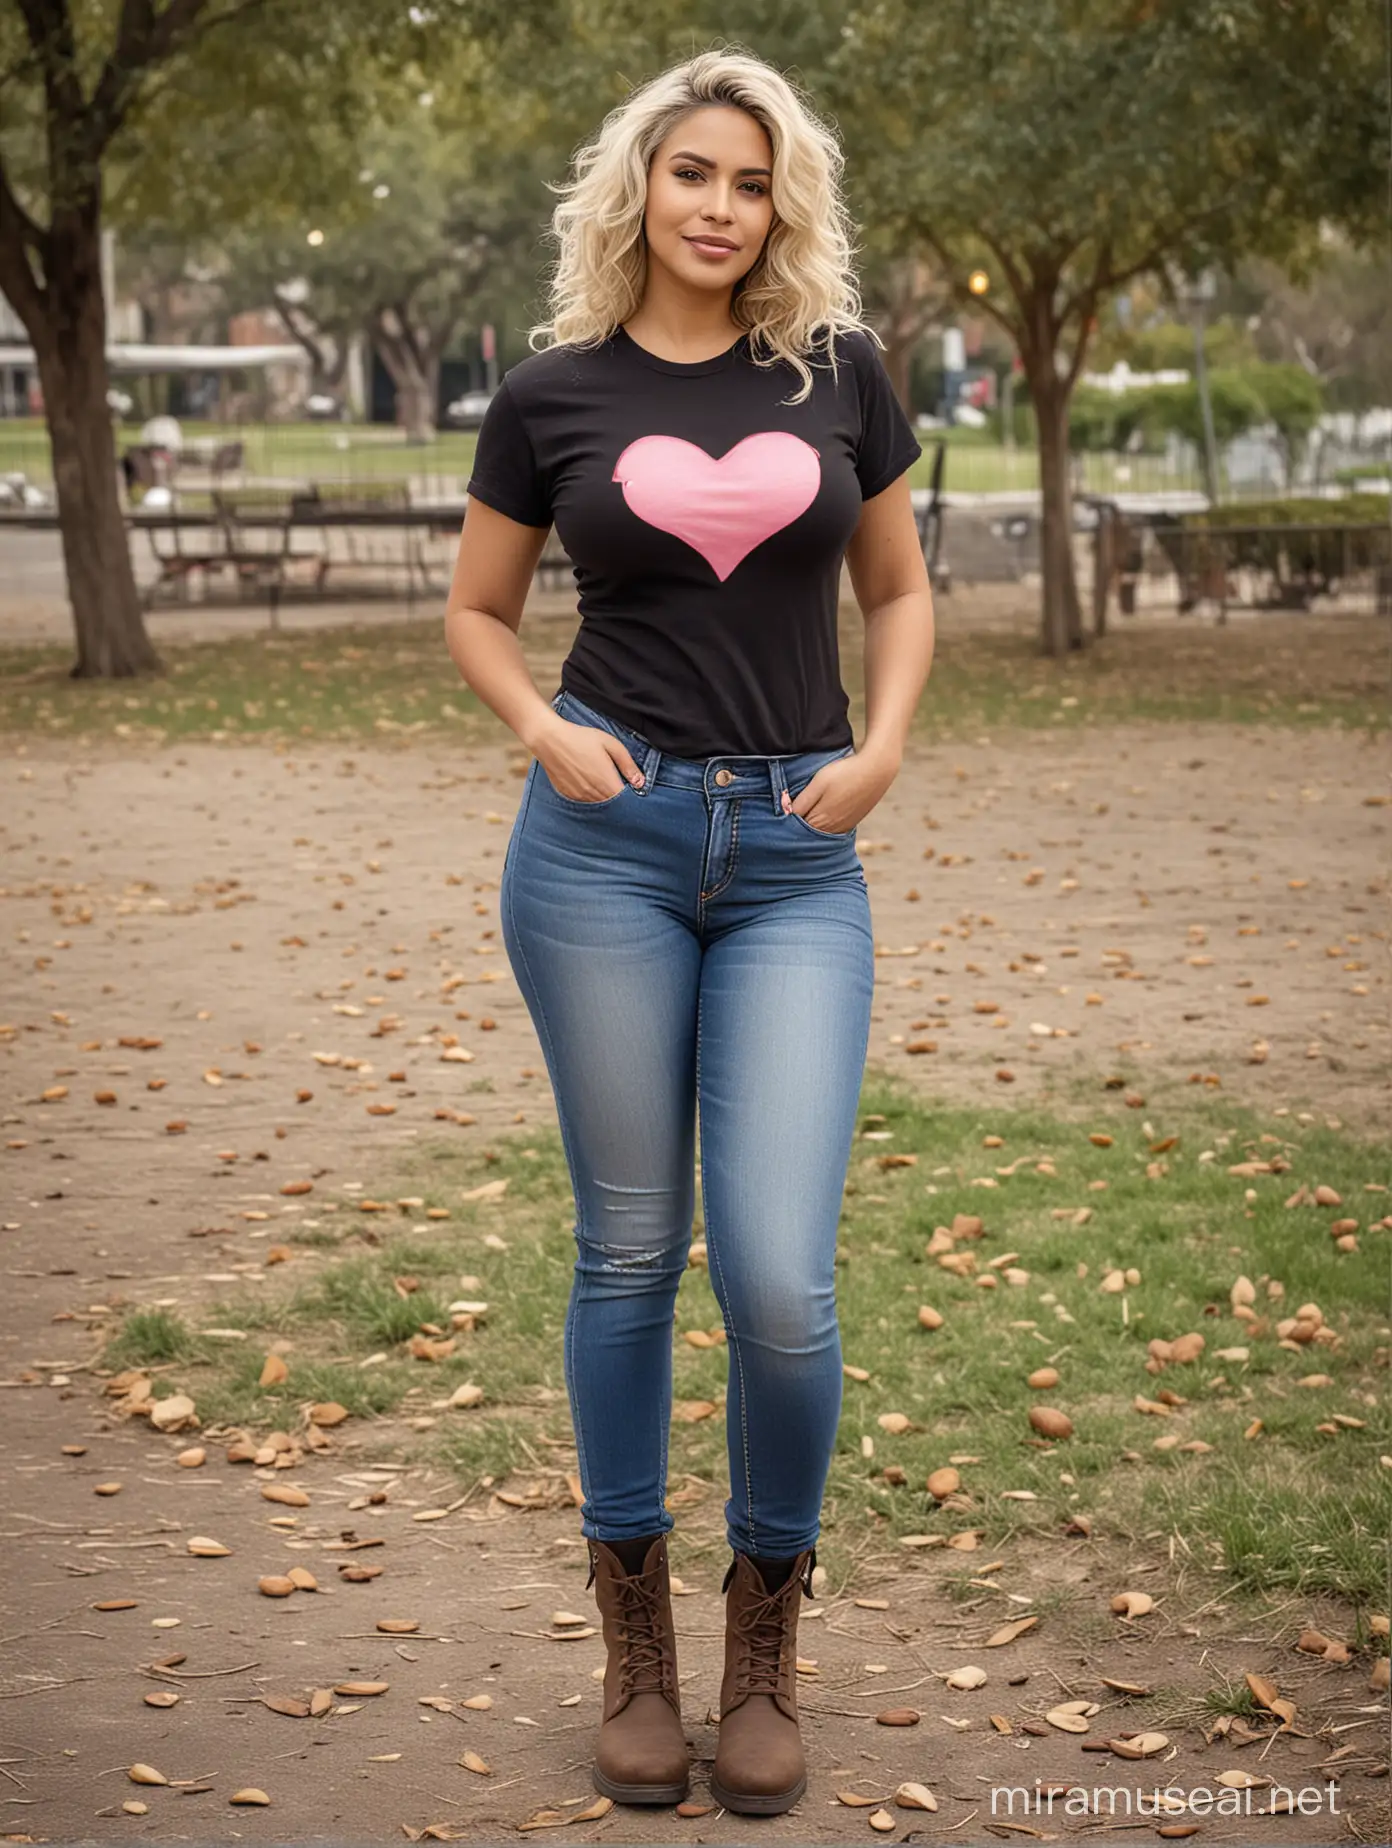 Blond Hispanic Woman with Almond Eyes and HeartShaped Face in Casual Park Outfit